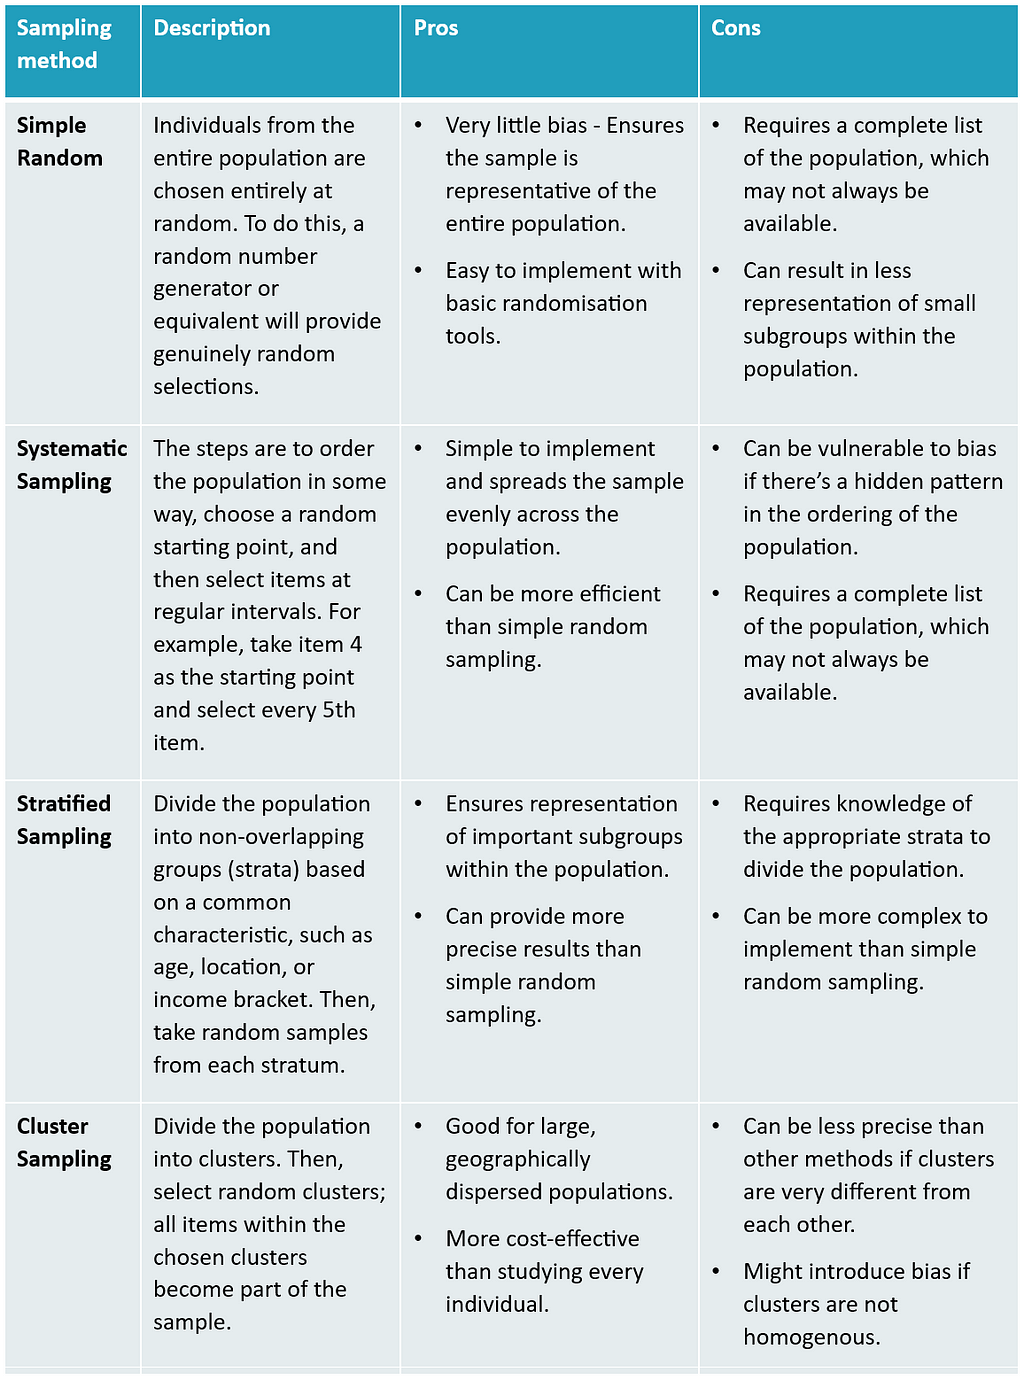 A table describing four common types of probability sampling: simple random sampling, systematic sampling, stratified sampling and cluster sampling.